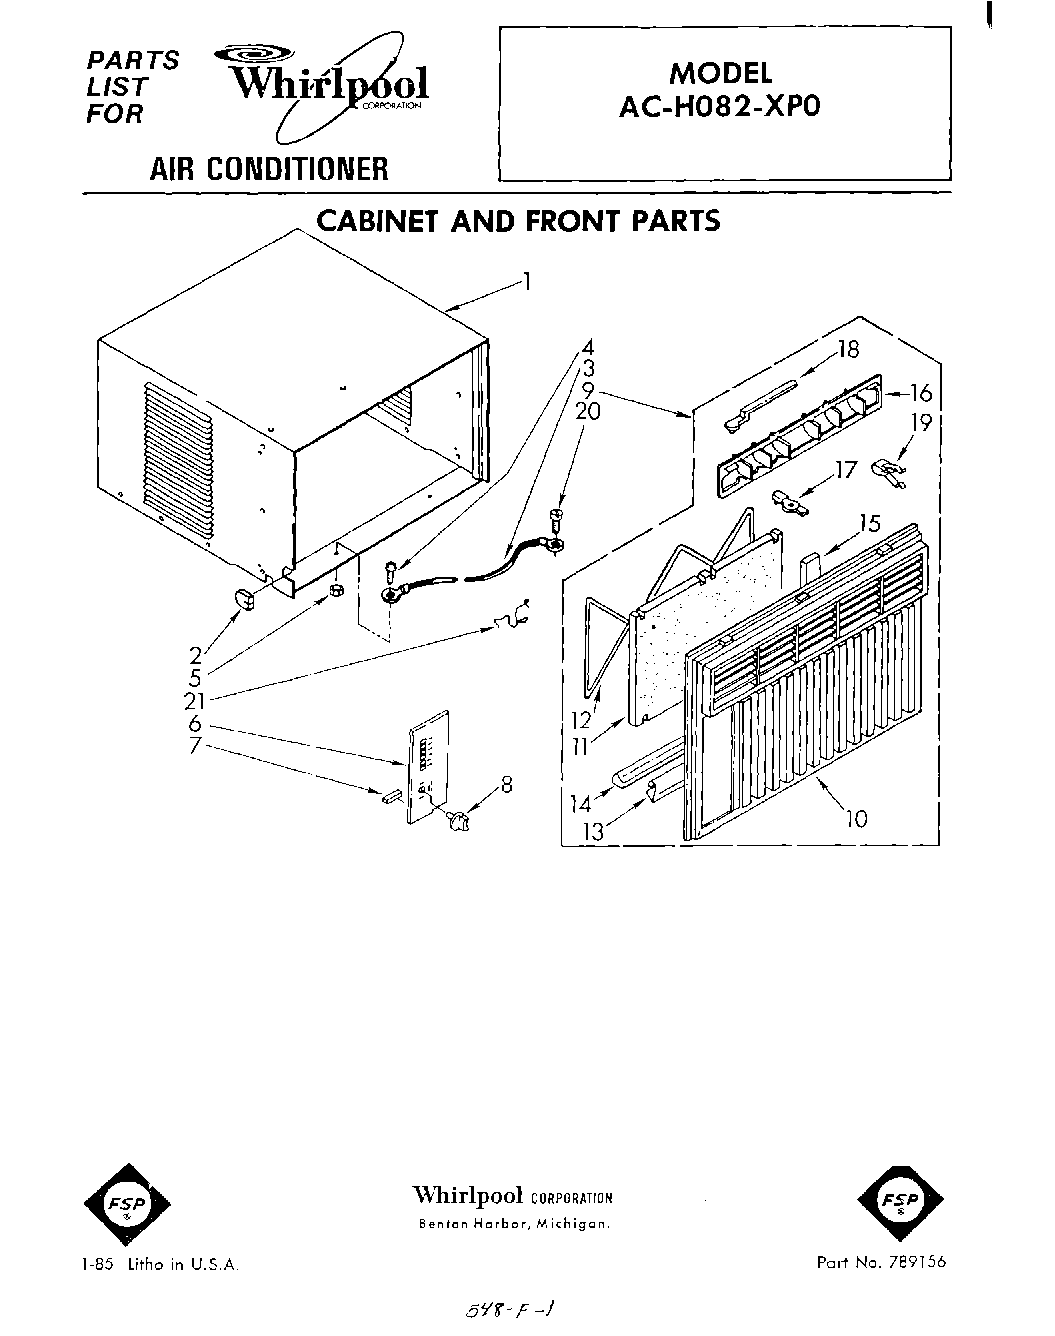 01 - CABINET AND FRONT PARTS